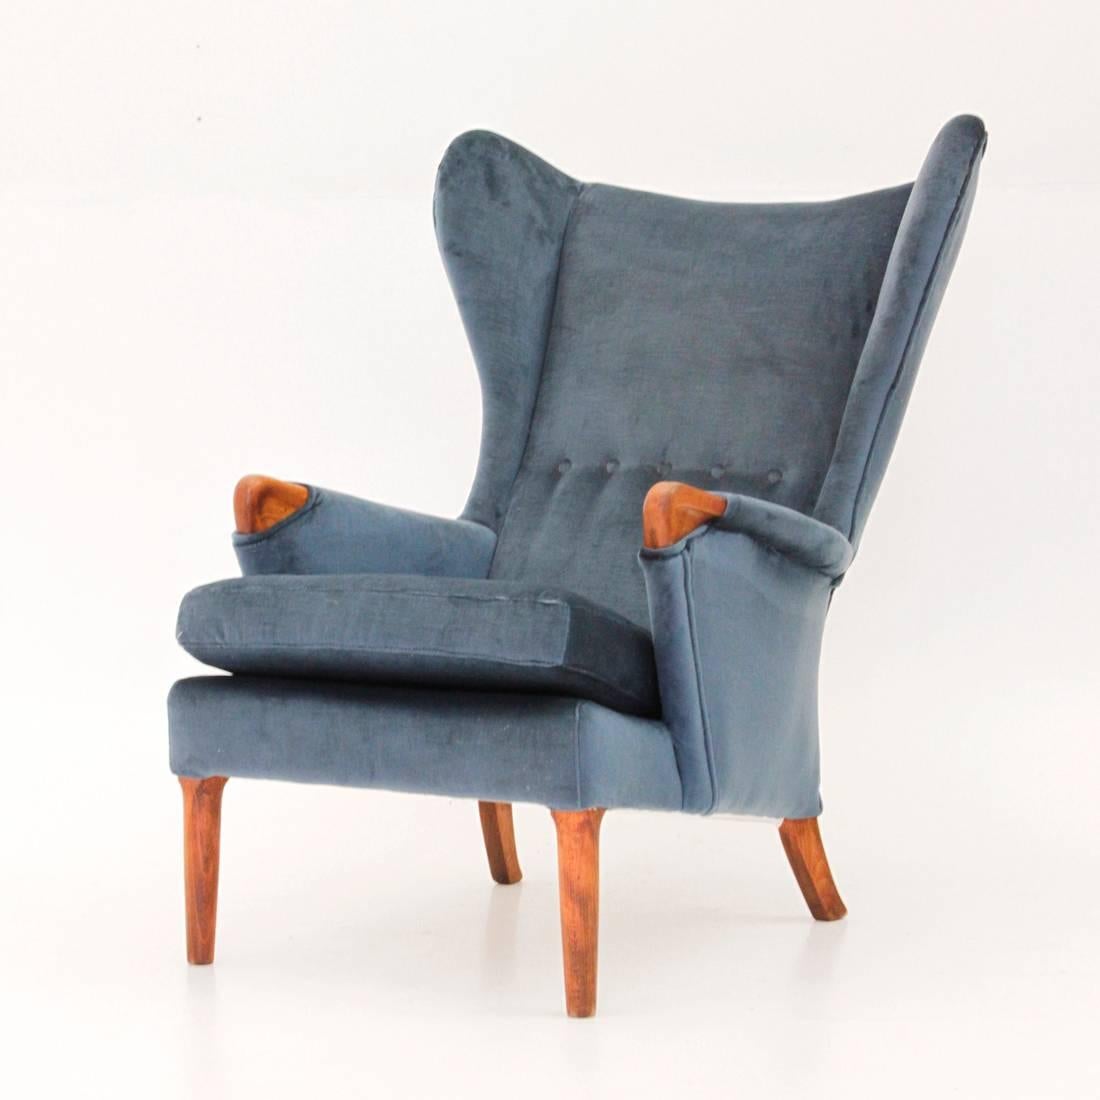 This wingback chair was made in the 1960s by British manufacturer Parker Knoll. It features an oak structure, velvet upholstery and buttons on the wingback.